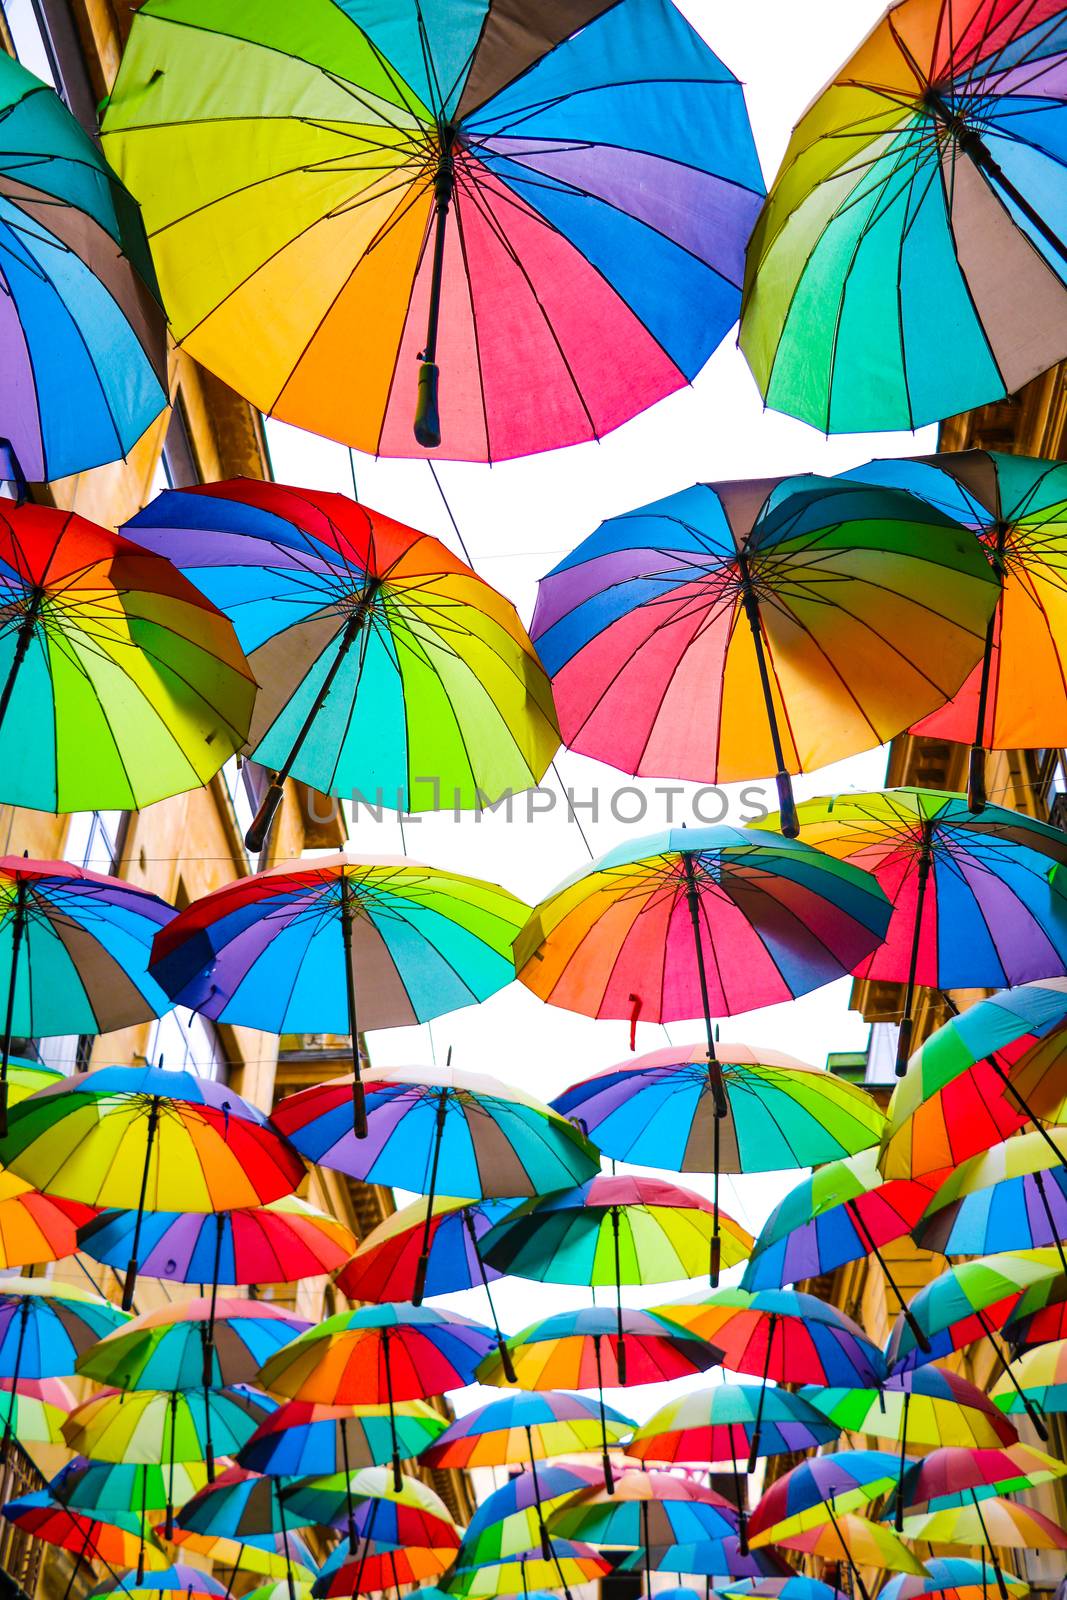 A set of colorful umbrellas or parasols covers a small alley of Bucharest